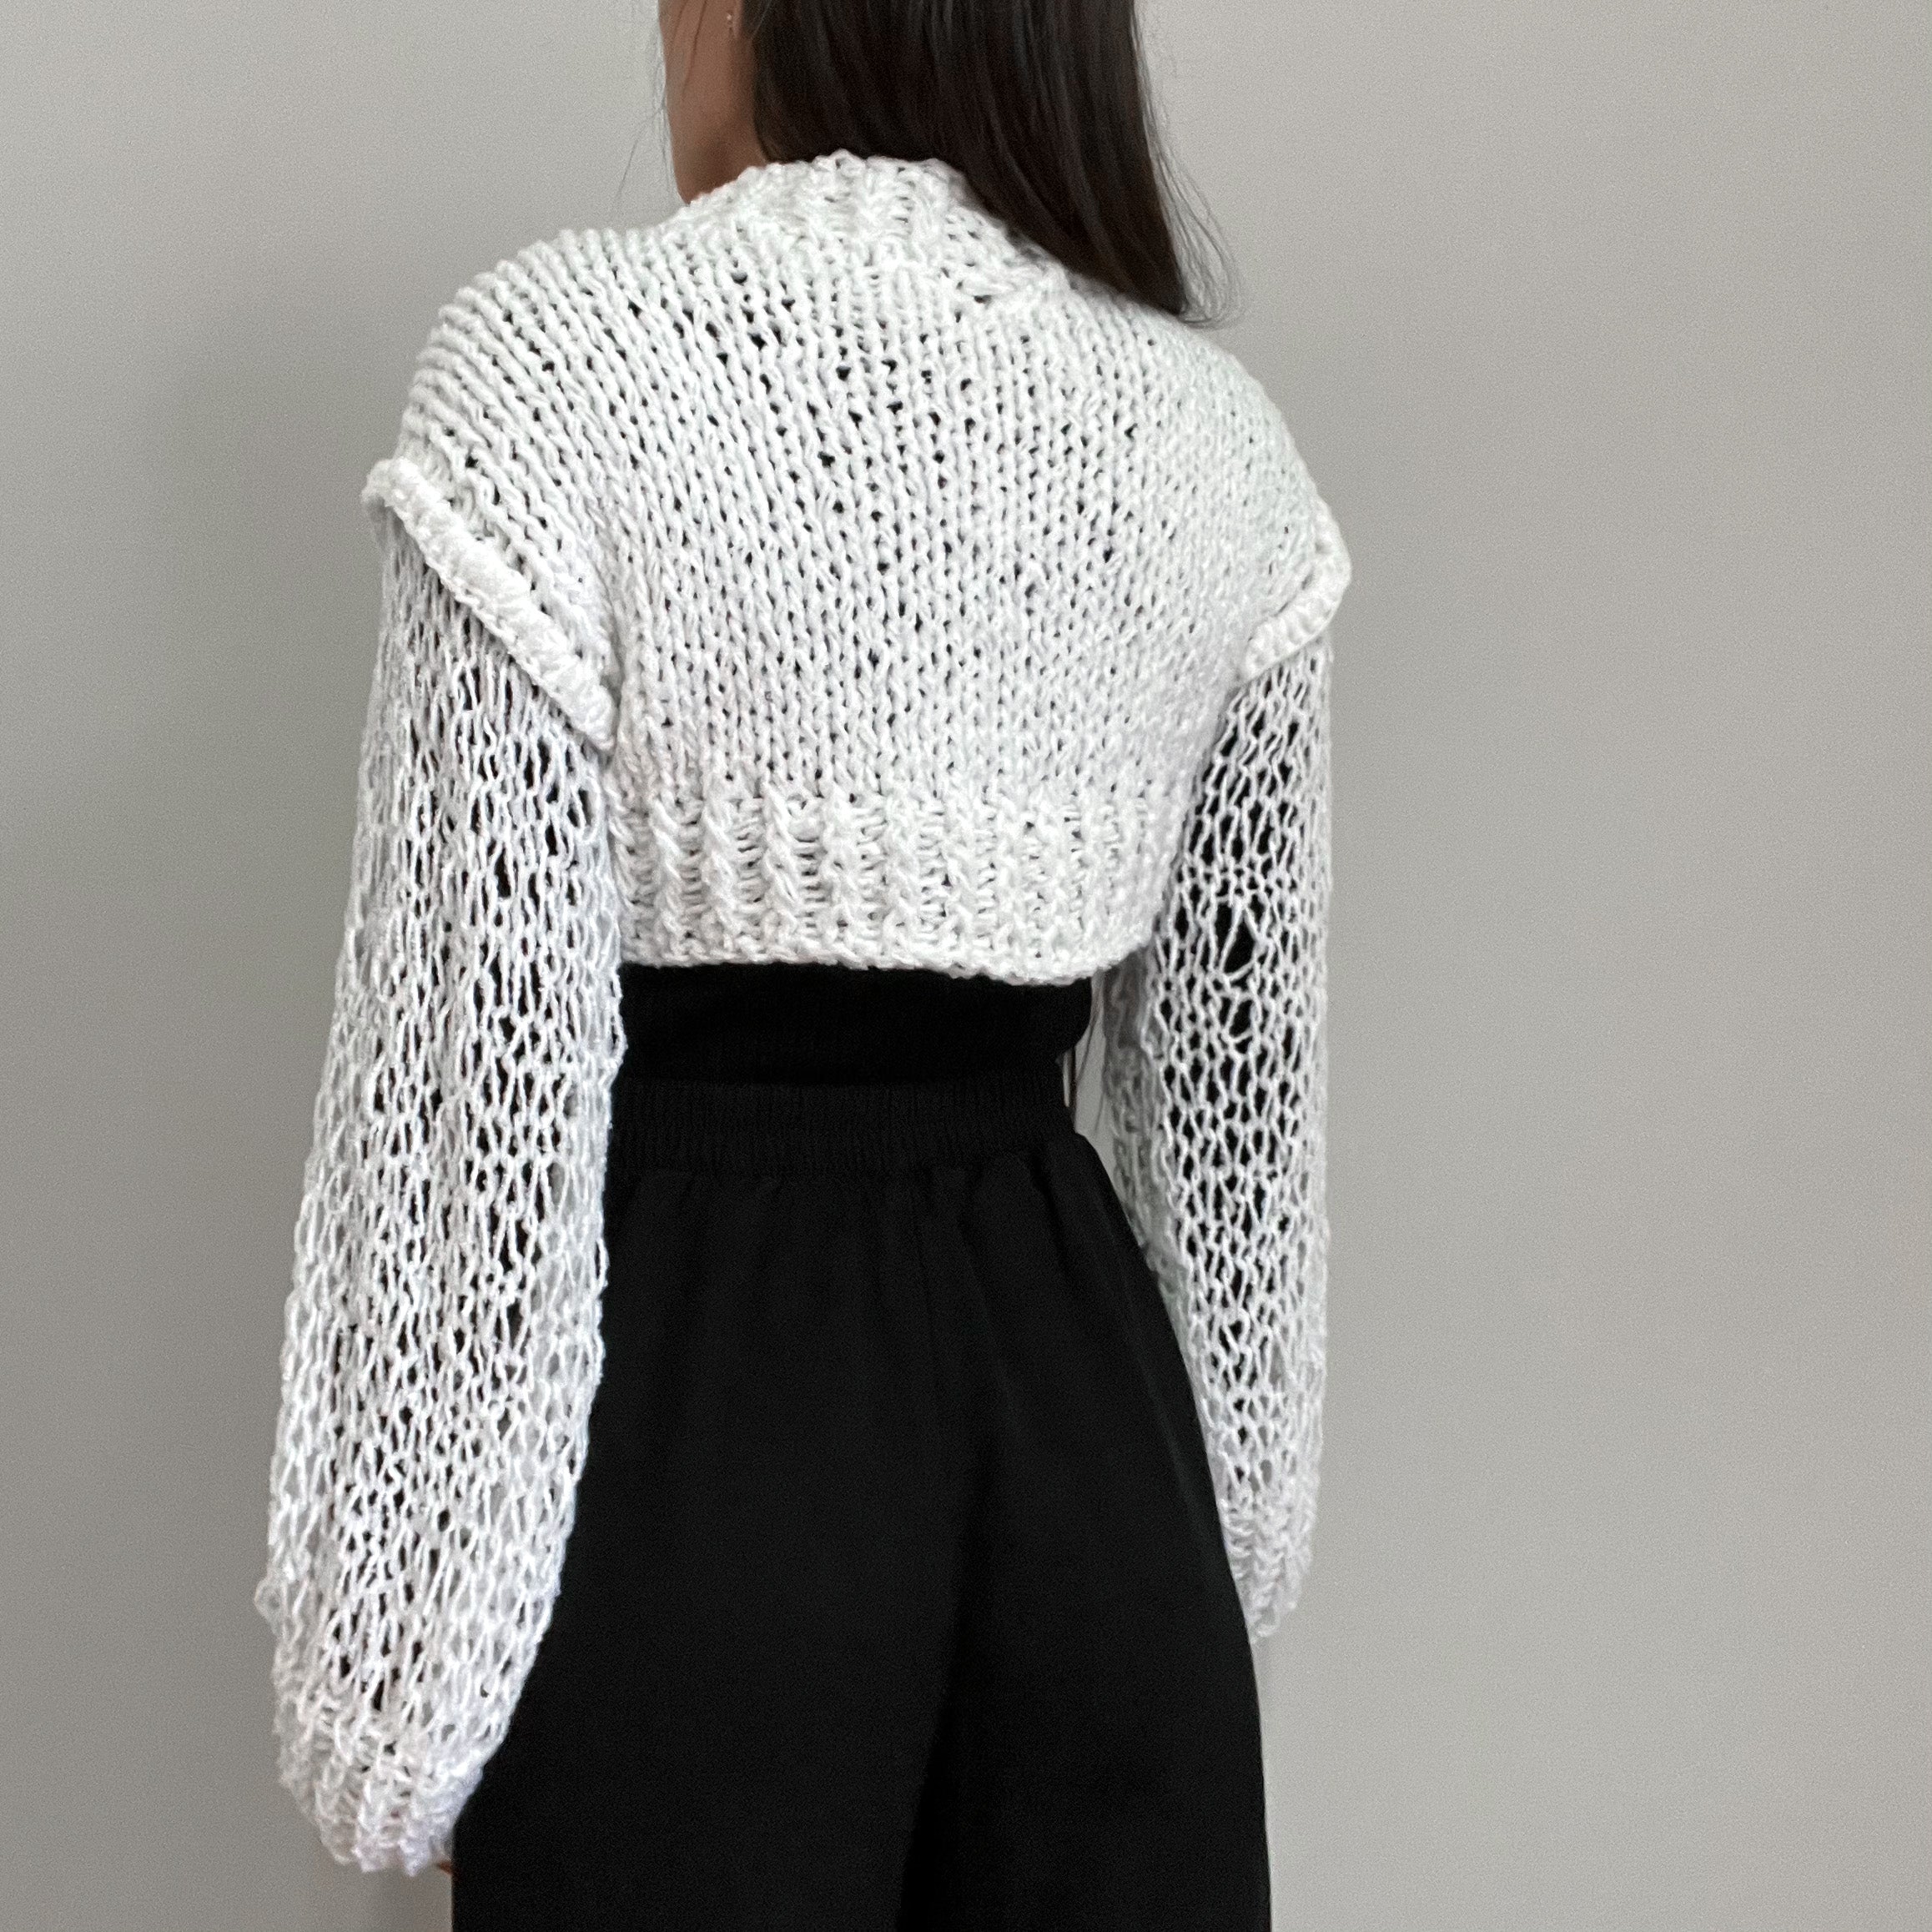 White Mock Neck cropped Sweater